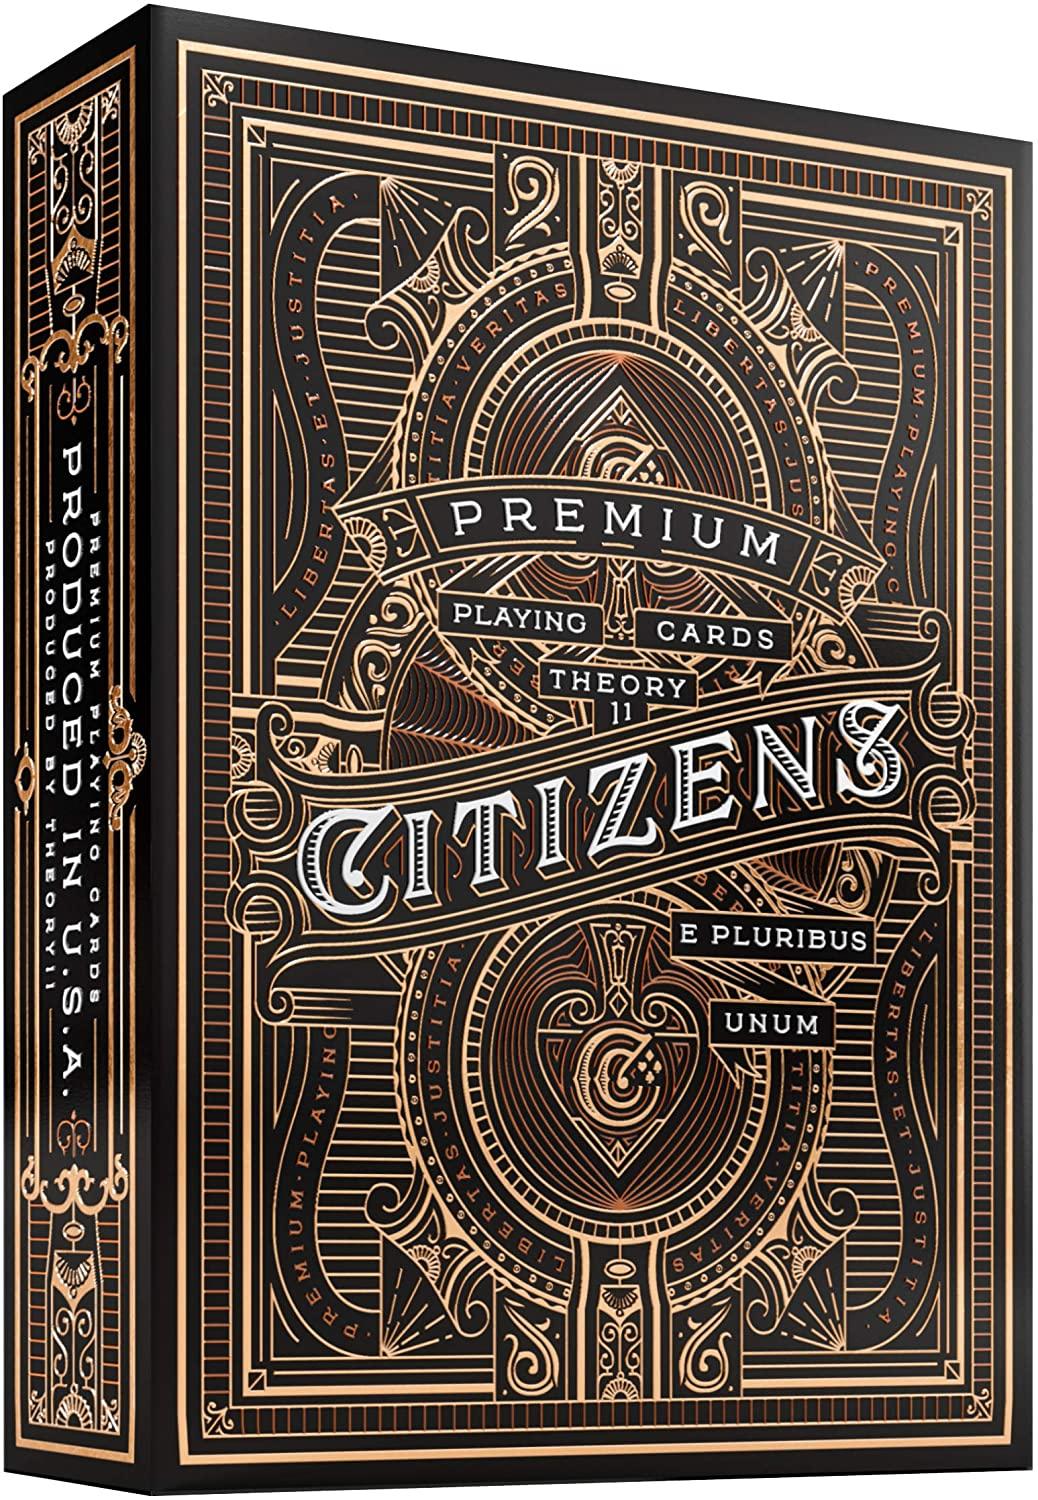 Citizens Theory 11 Playing Cards